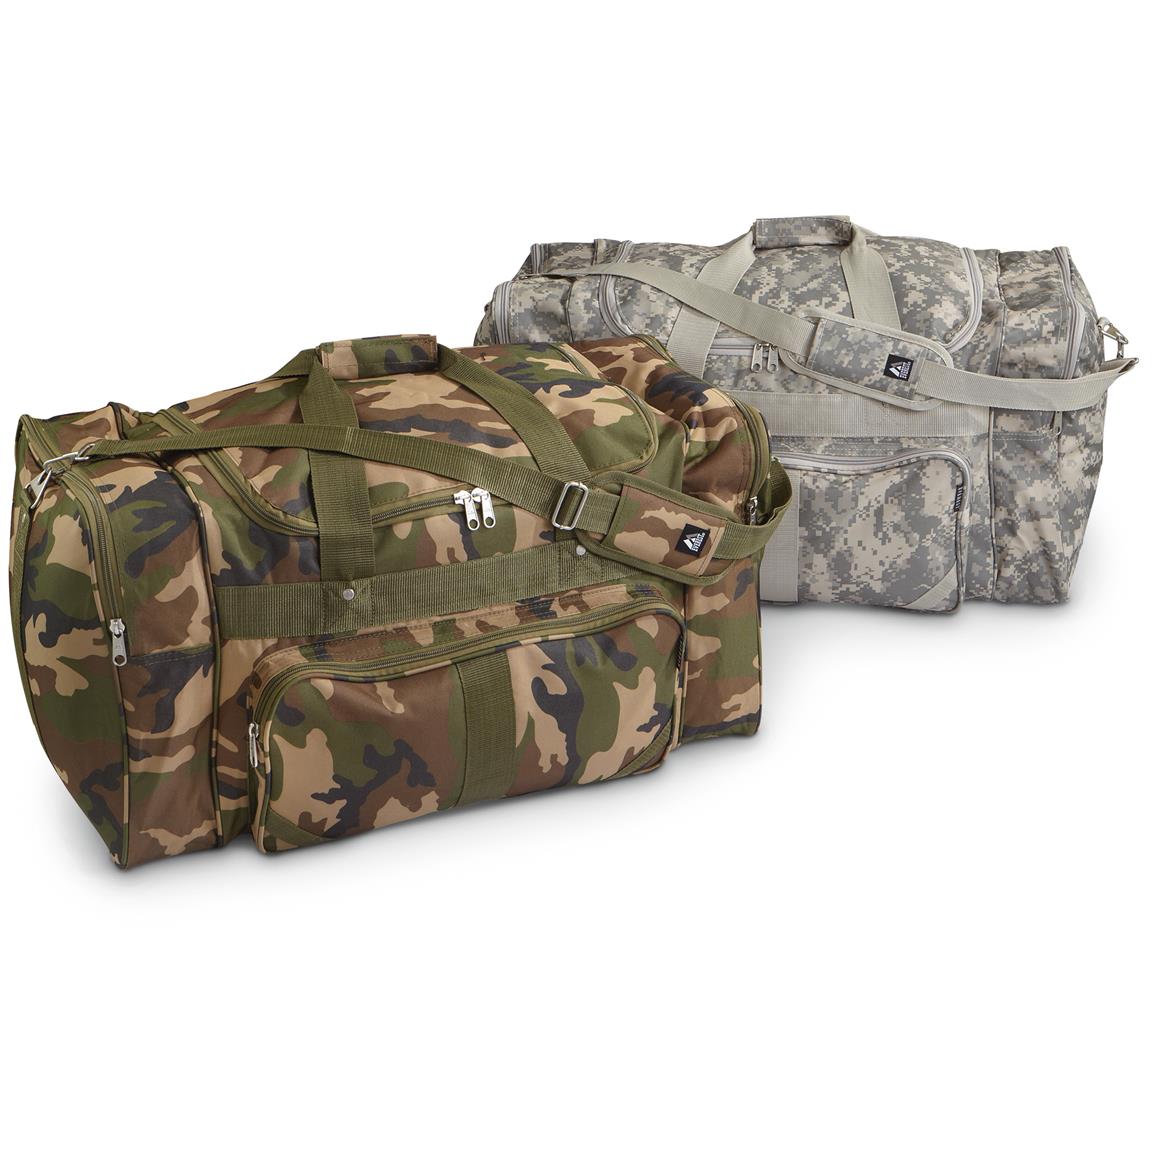 Military-style 4-compartment Camo Duffel Bag - 640719, Military & Camo Duffle Bags at Sportsman ...